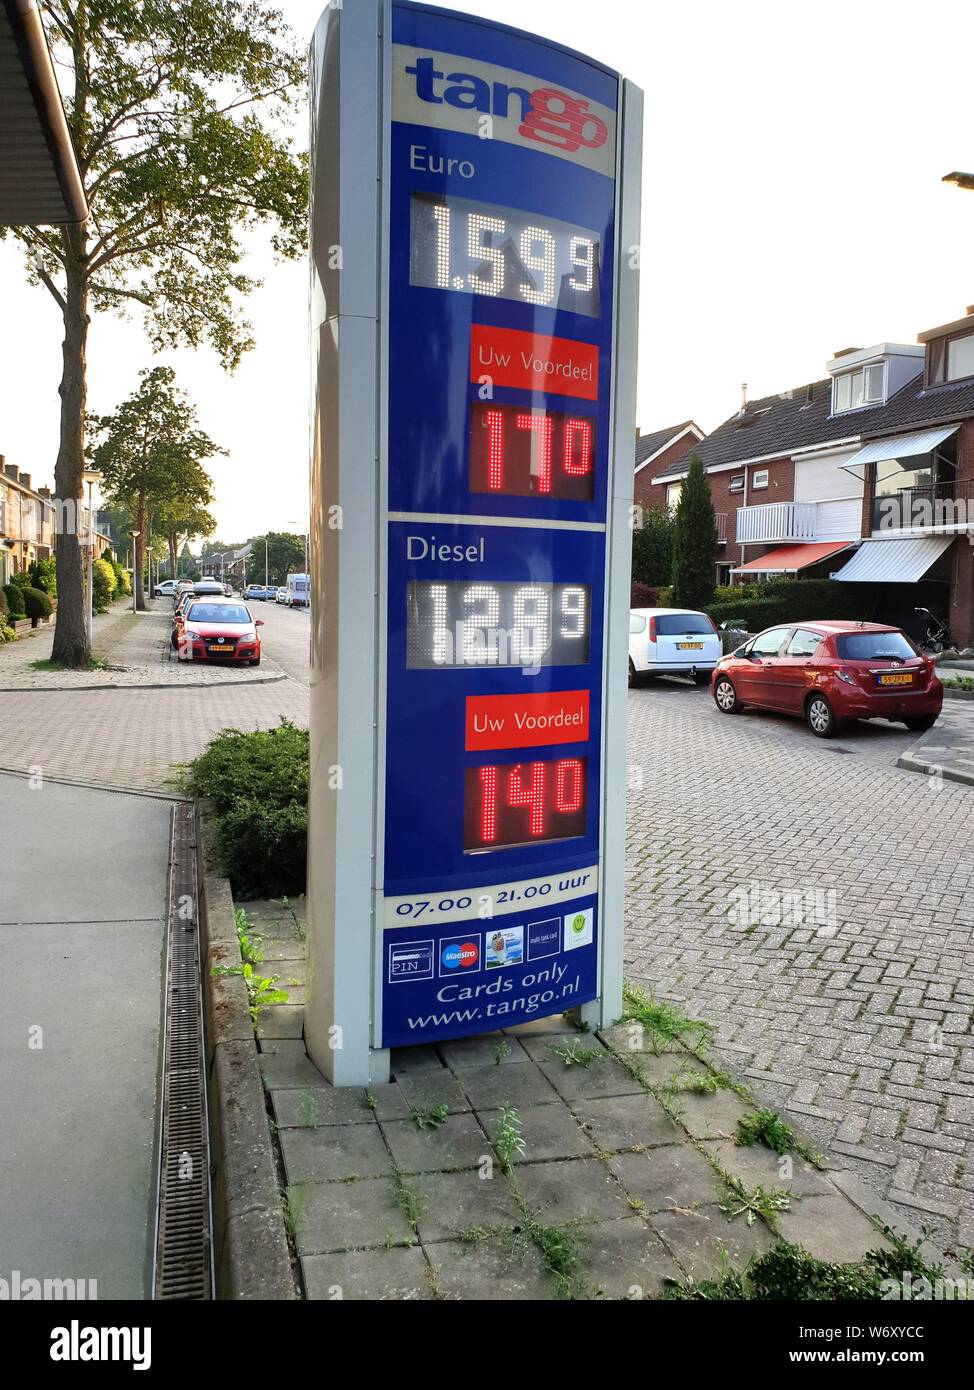 Prices for euro 95 and Diesel fuel in Euro per in the Netherlands at a tango petrol station Stock Photo - Alamy